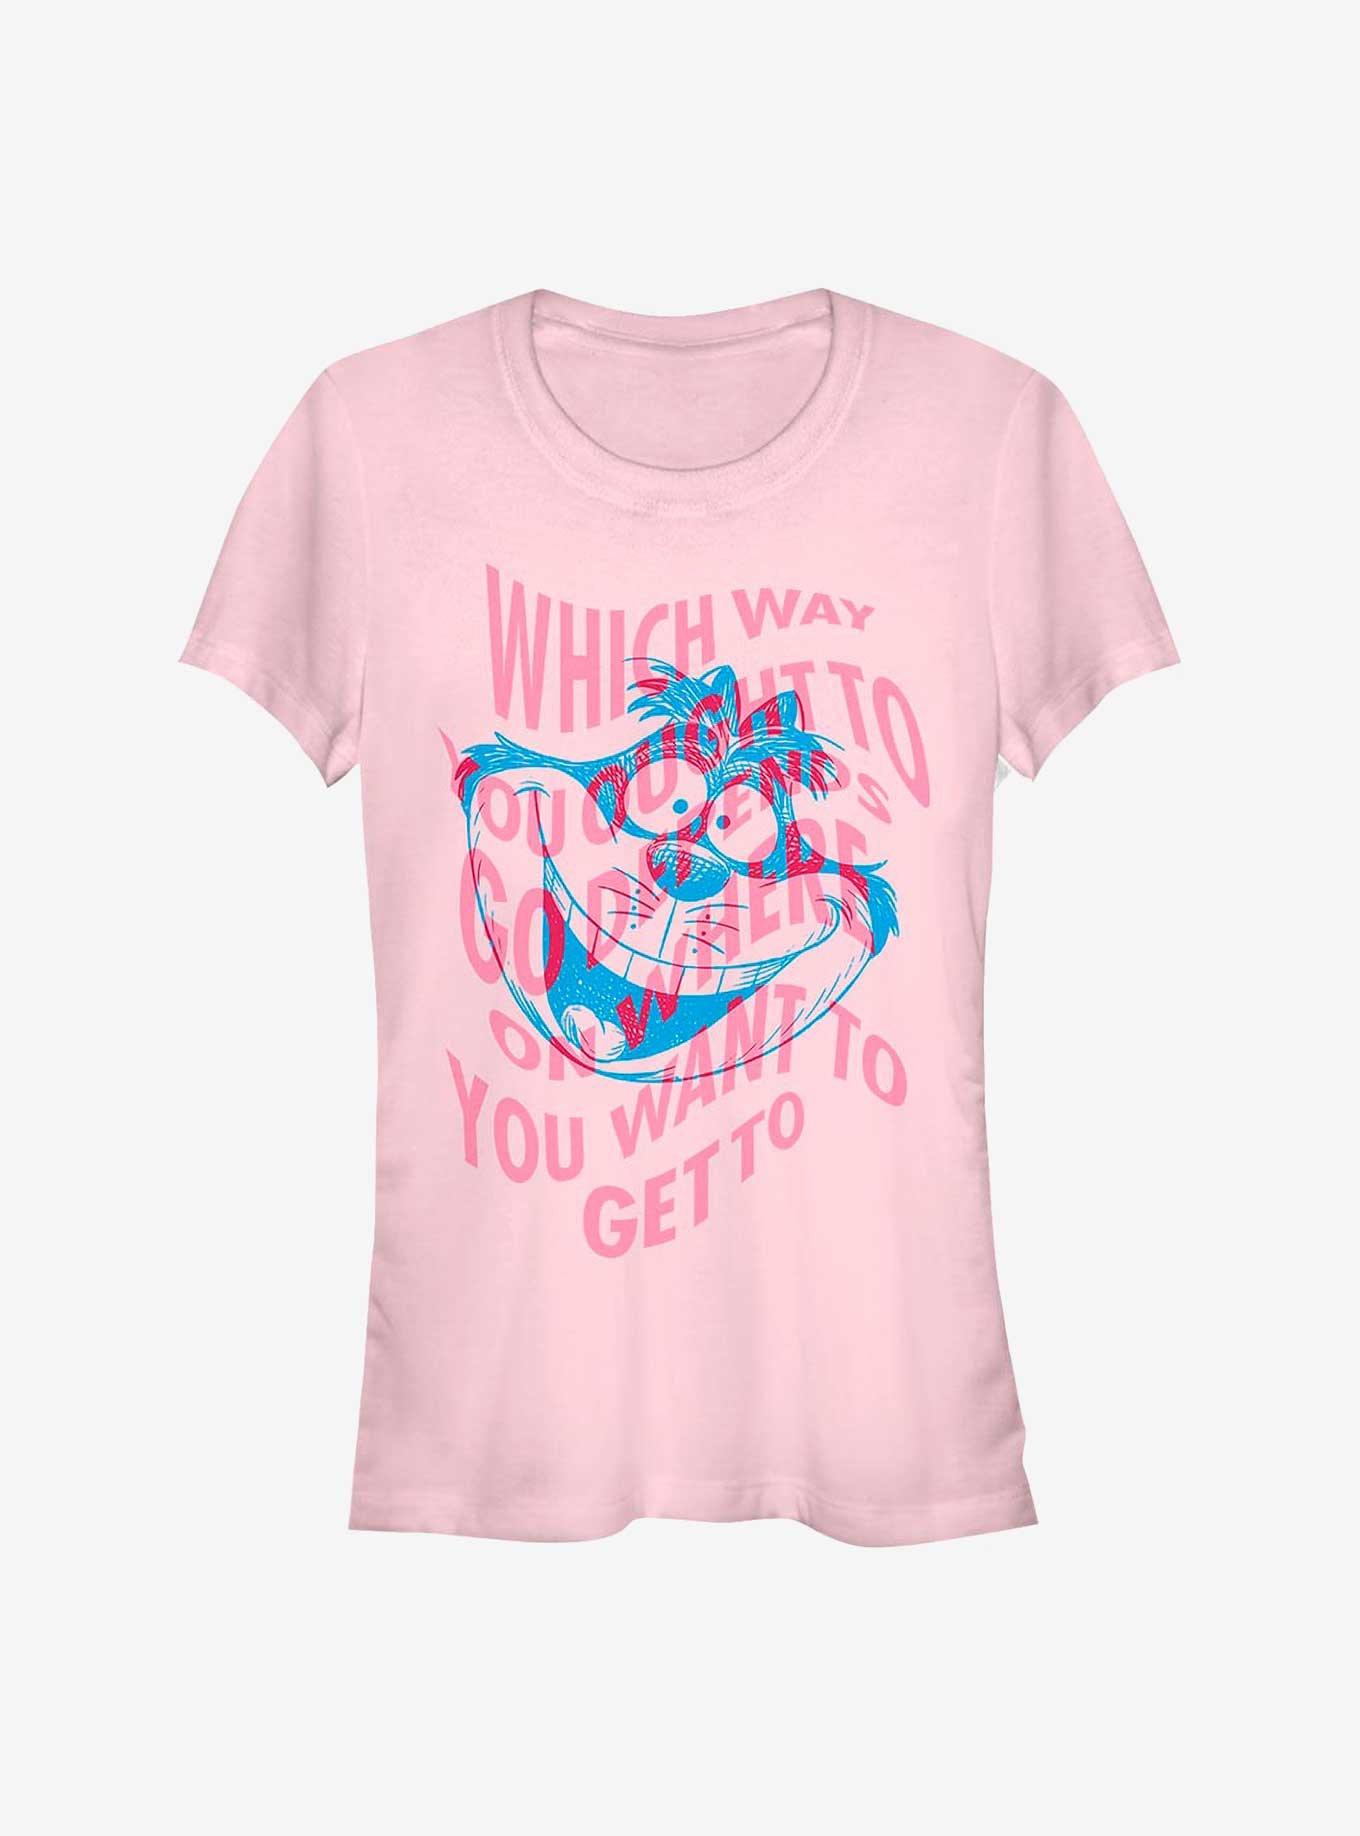 Disney Alice Wonderland Which Way You Ought To Go Girls T-Shirt